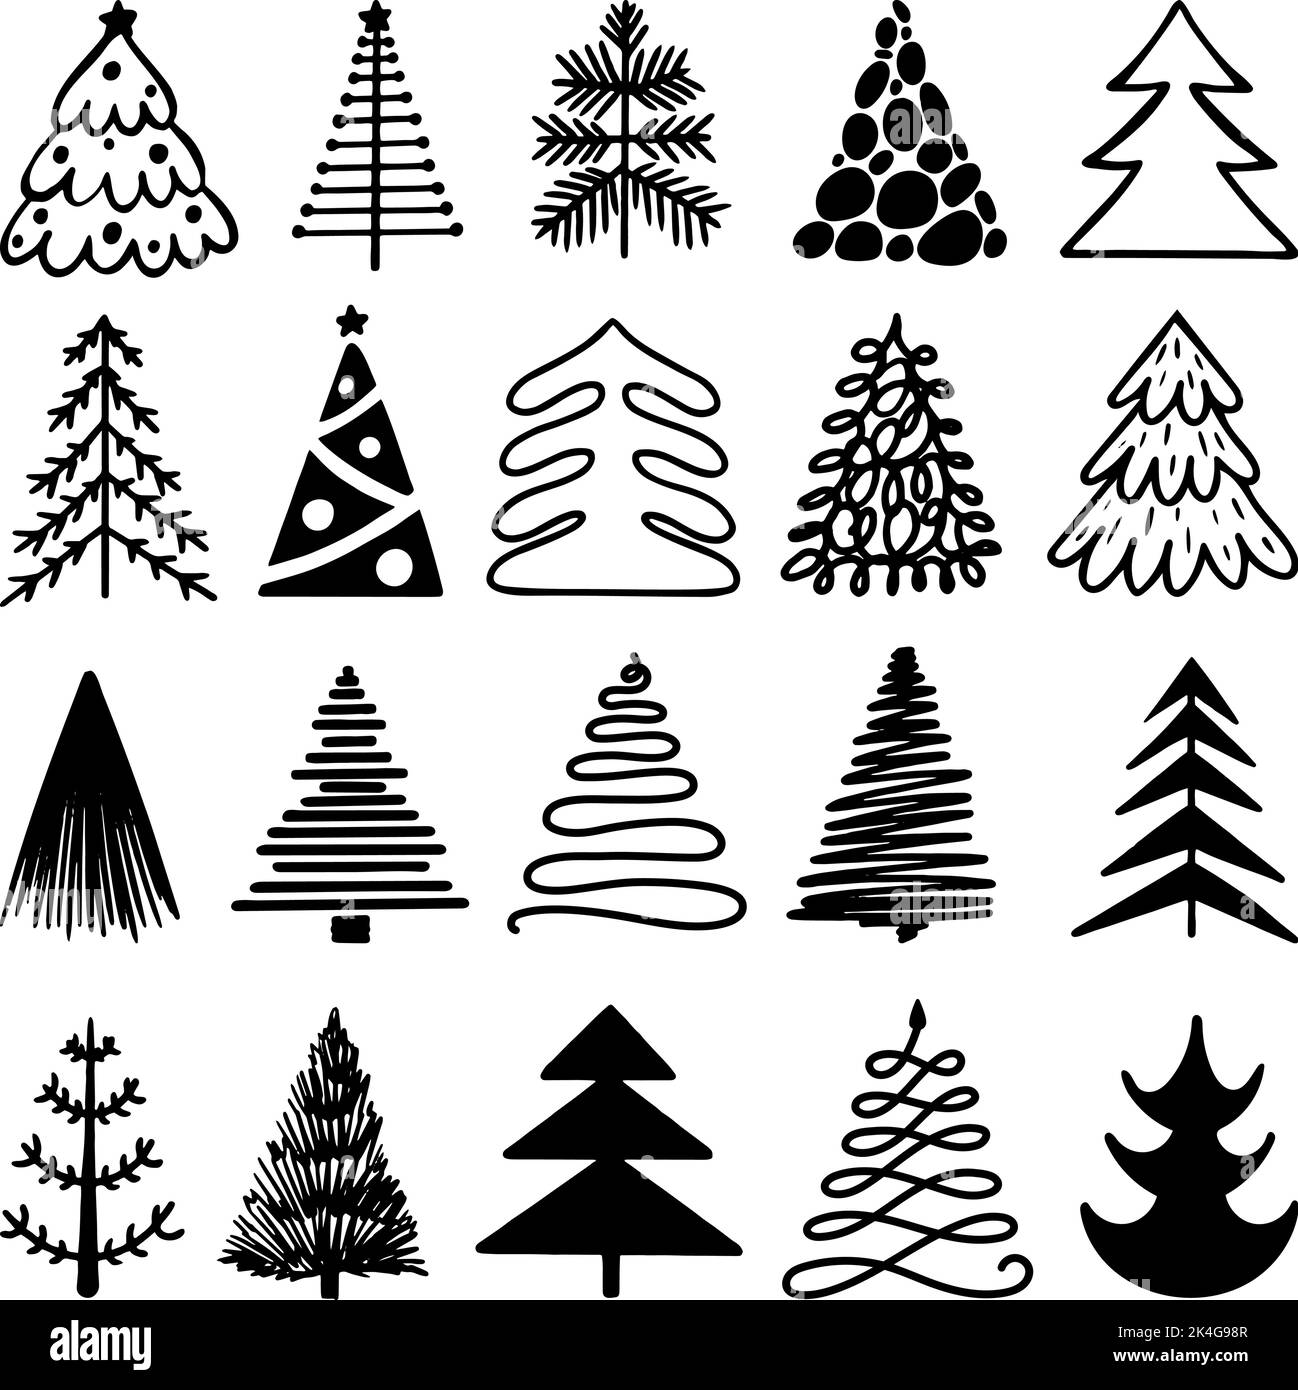 Sketch christmas tree isolated logo set. Hand drawn pencil holiday winter elements. Black fir trees draw rough paintbrush. Joy xmas neoteric vector ic Stock Vector